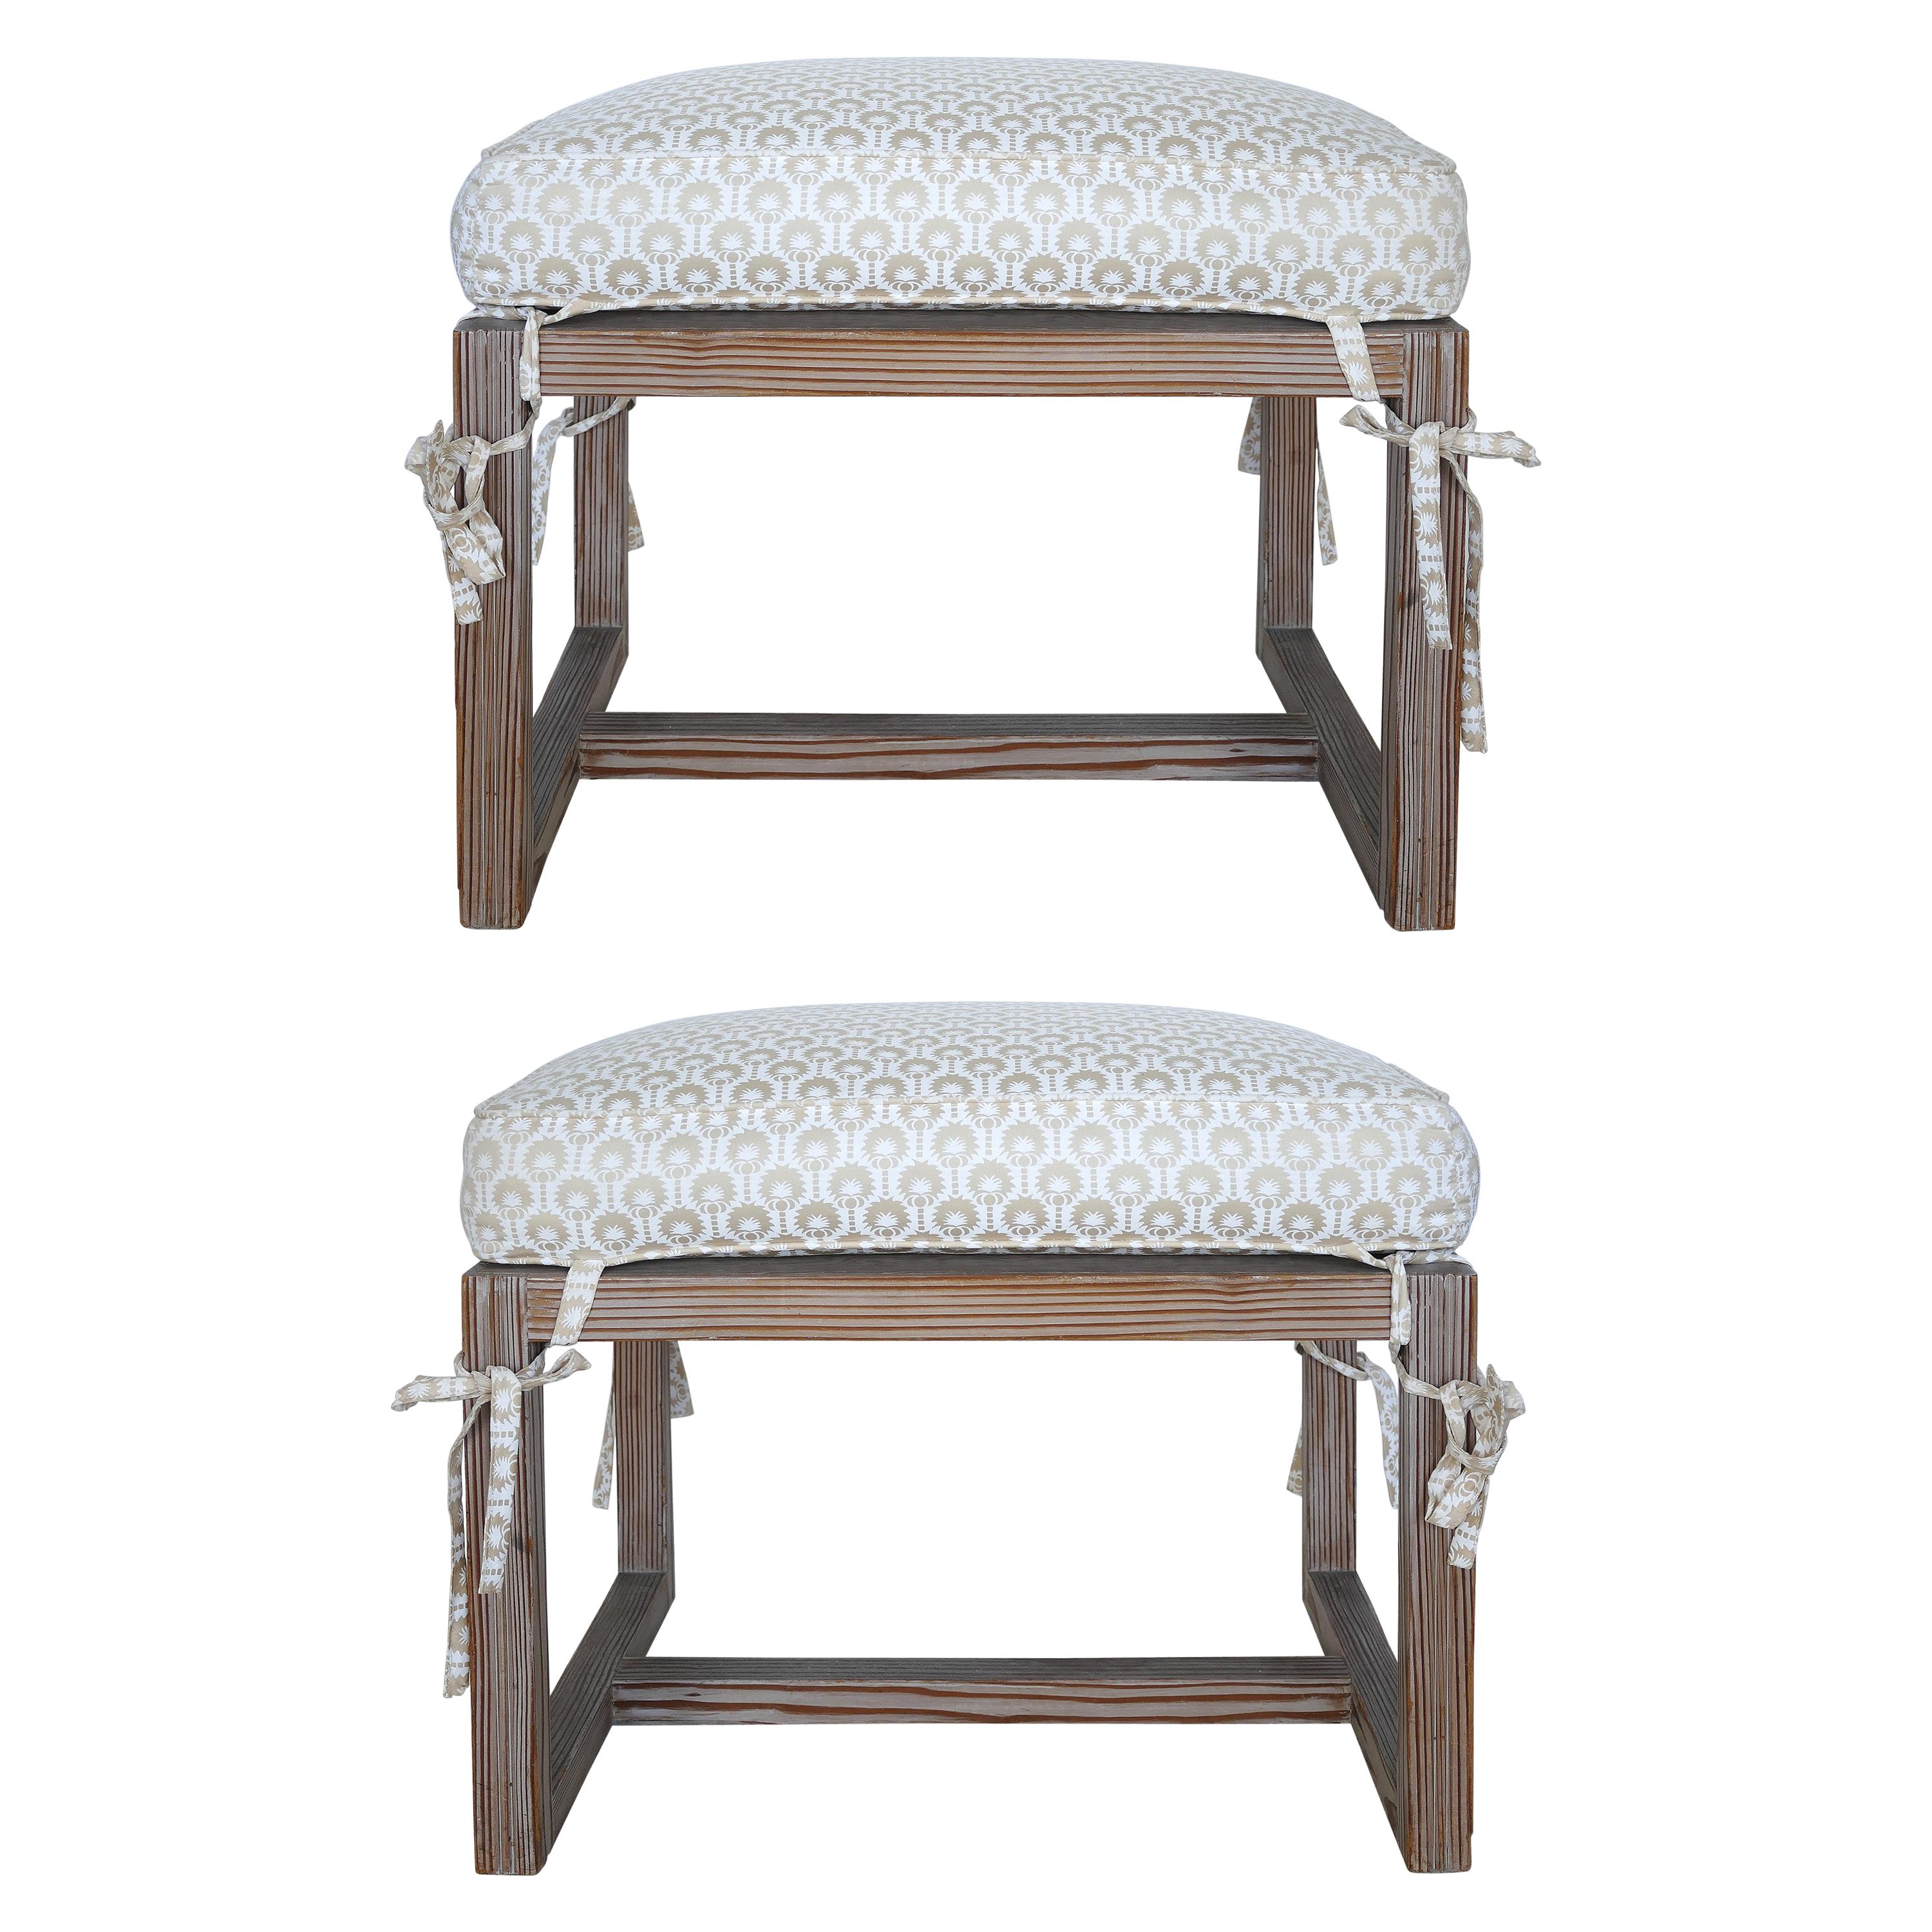 Tommi Parzinger Cerused Benches with Cushions, a Pair